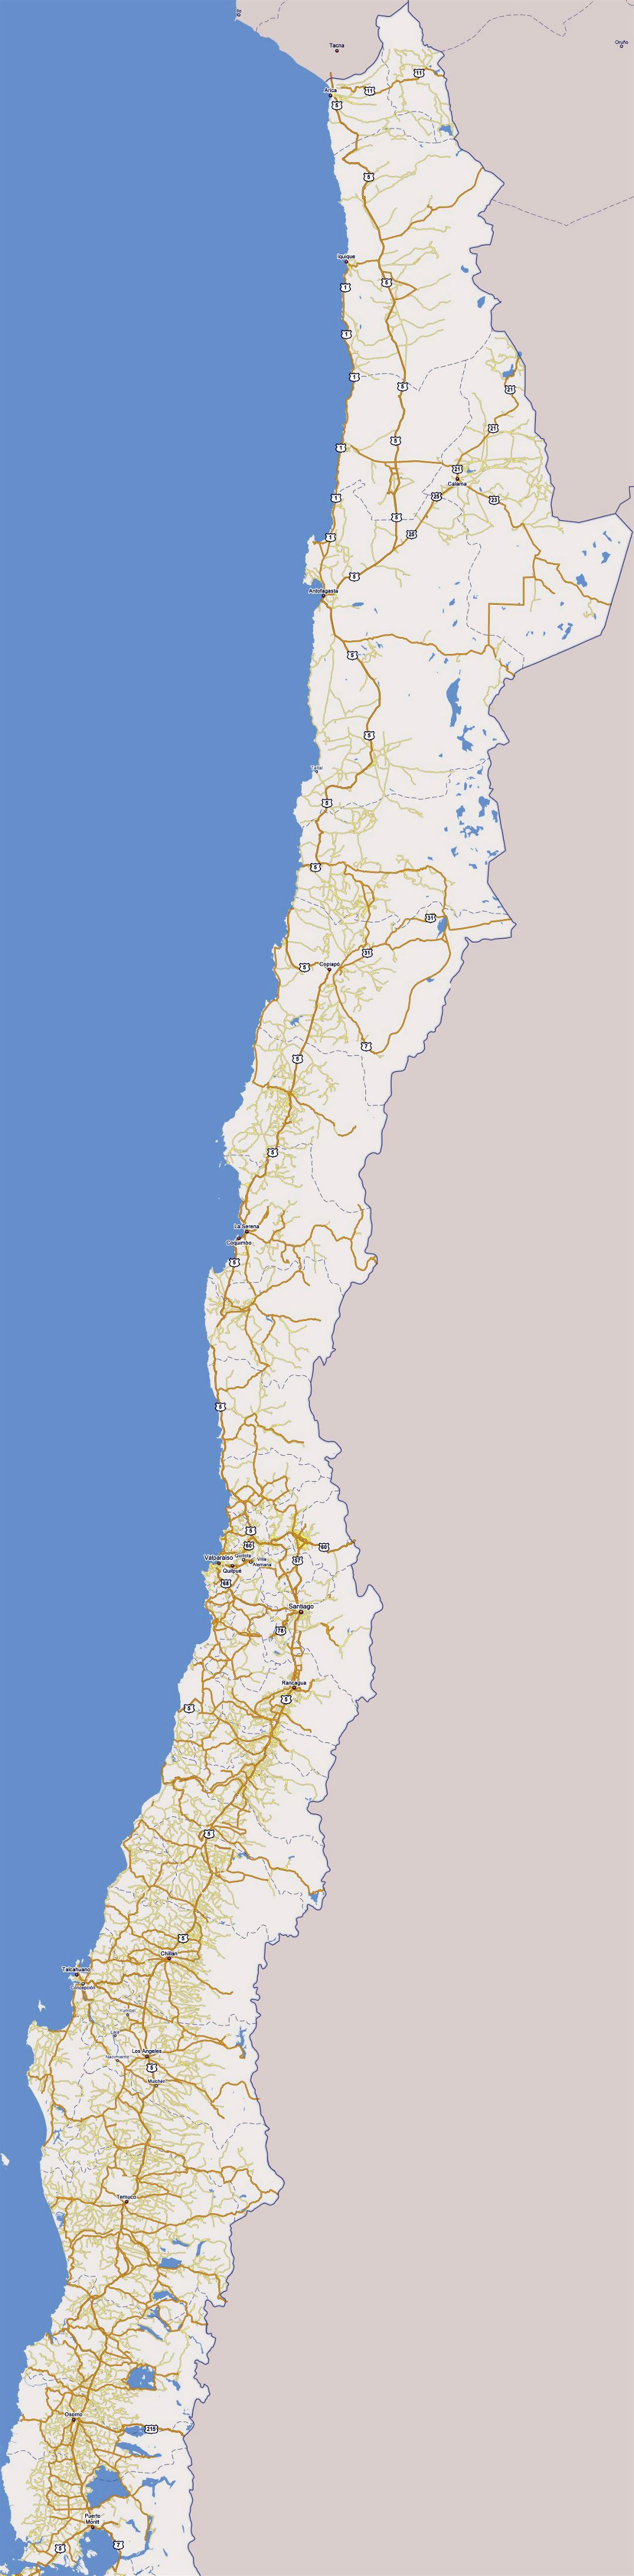 Large road map of Chile